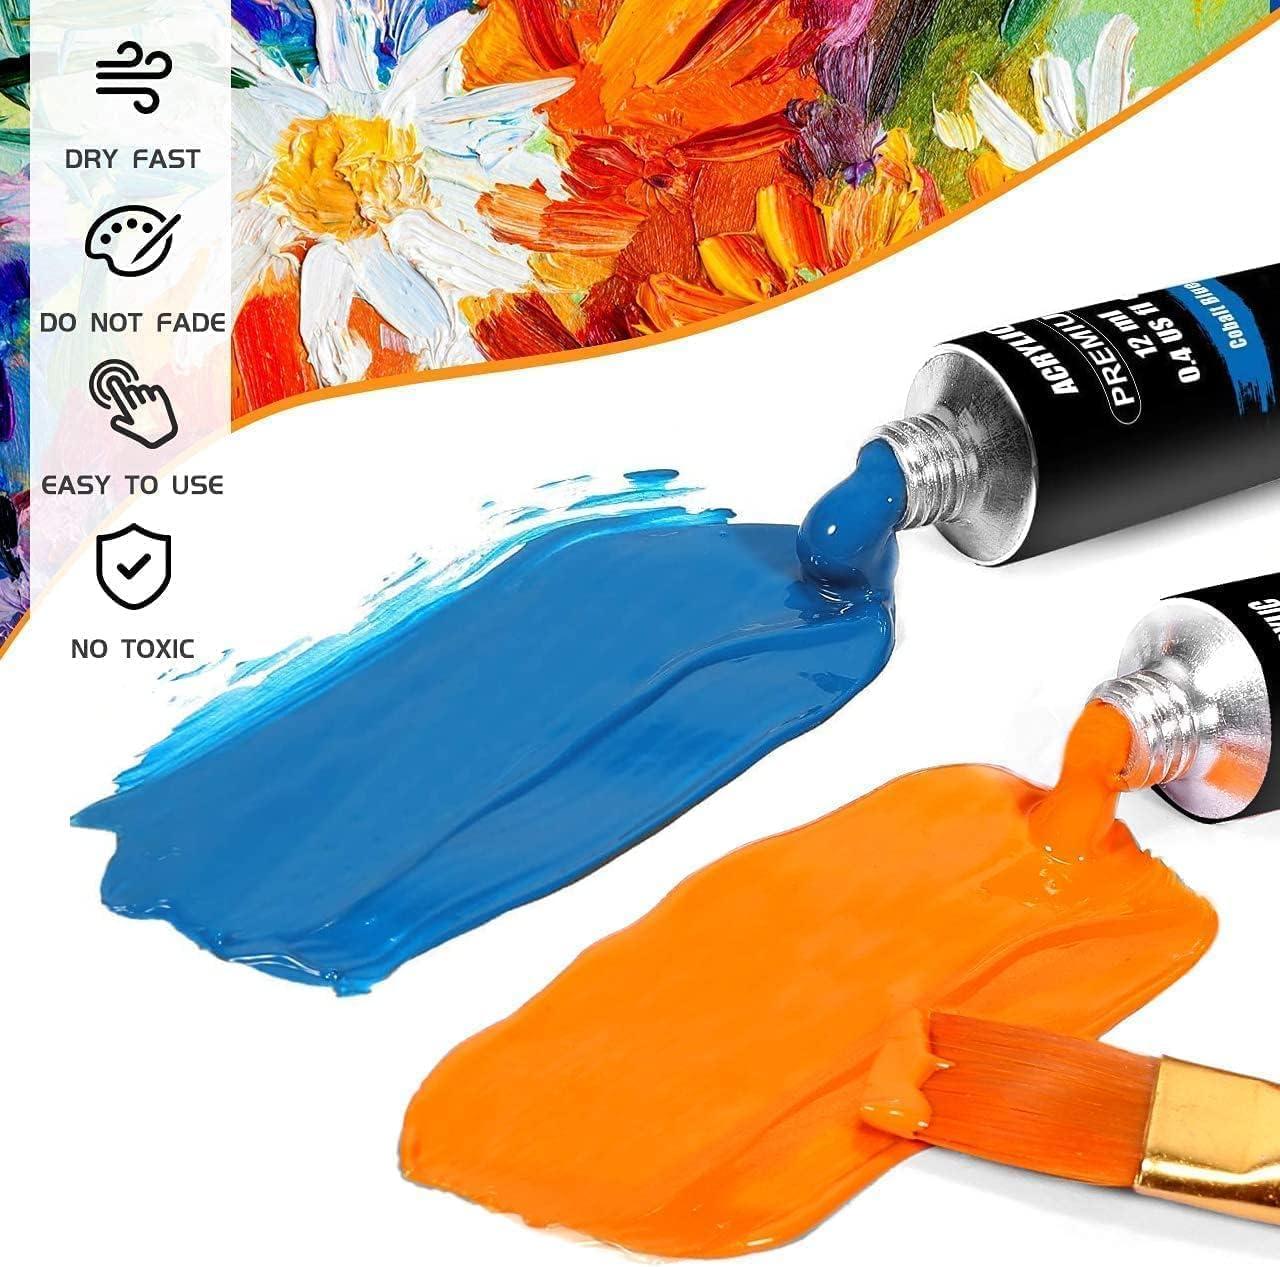 Acrylic Paint Pigment 12 Colors Available Art Craft Paints Gifts